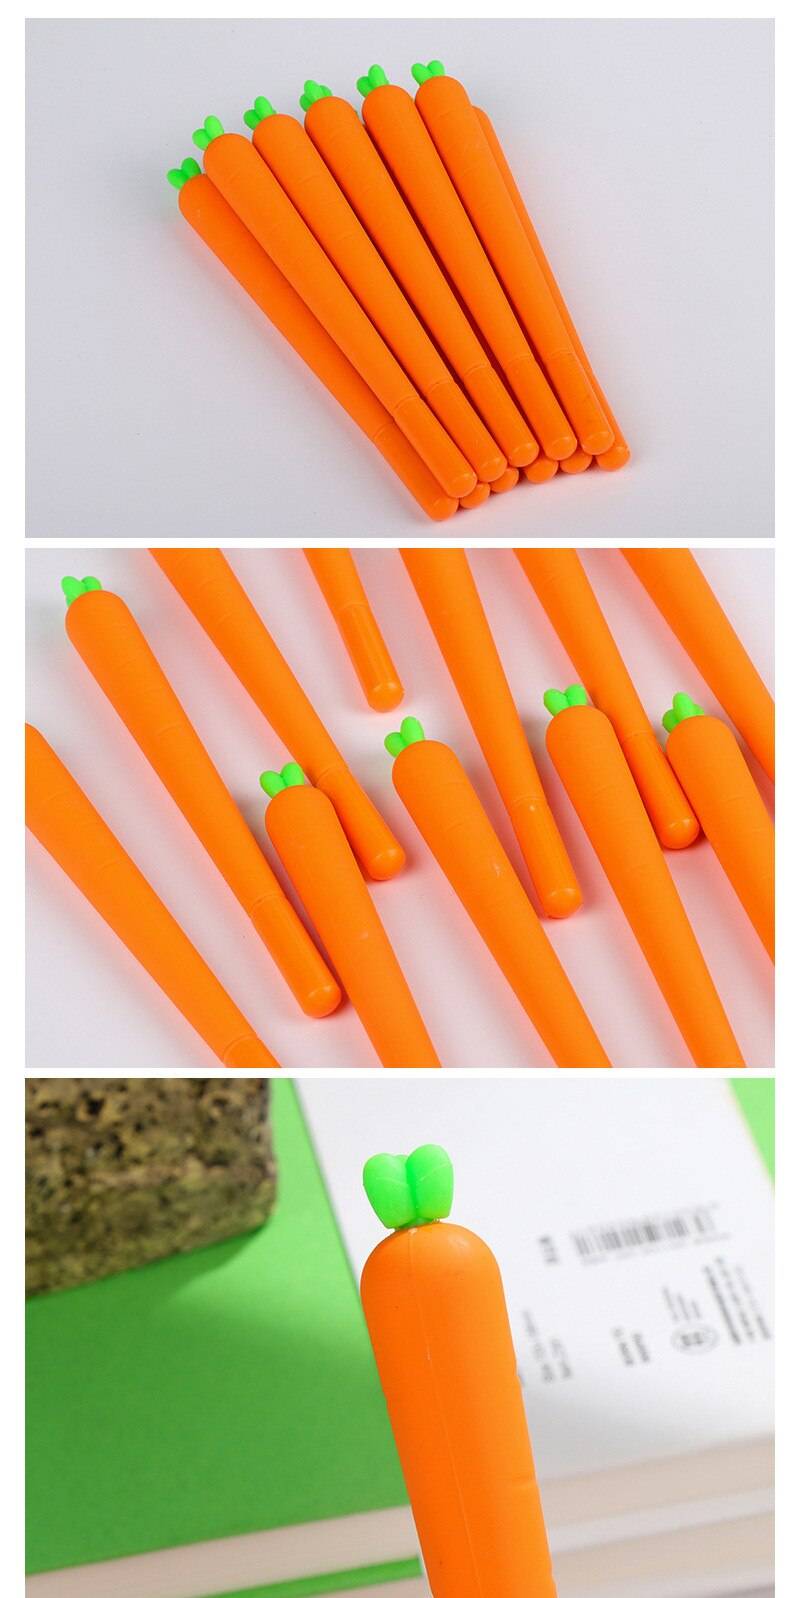 Cute Carrot Shape Gel Pens - Kawaii Stop - Carrot, Cute, Gel Pen, Gift, Kawaii, Kids, Lifelike, Office, Pen, Pens &amp; Pencils, School, Signing, Silicone, Stationary &amp; More, Stationery, Student, Supply, Writing